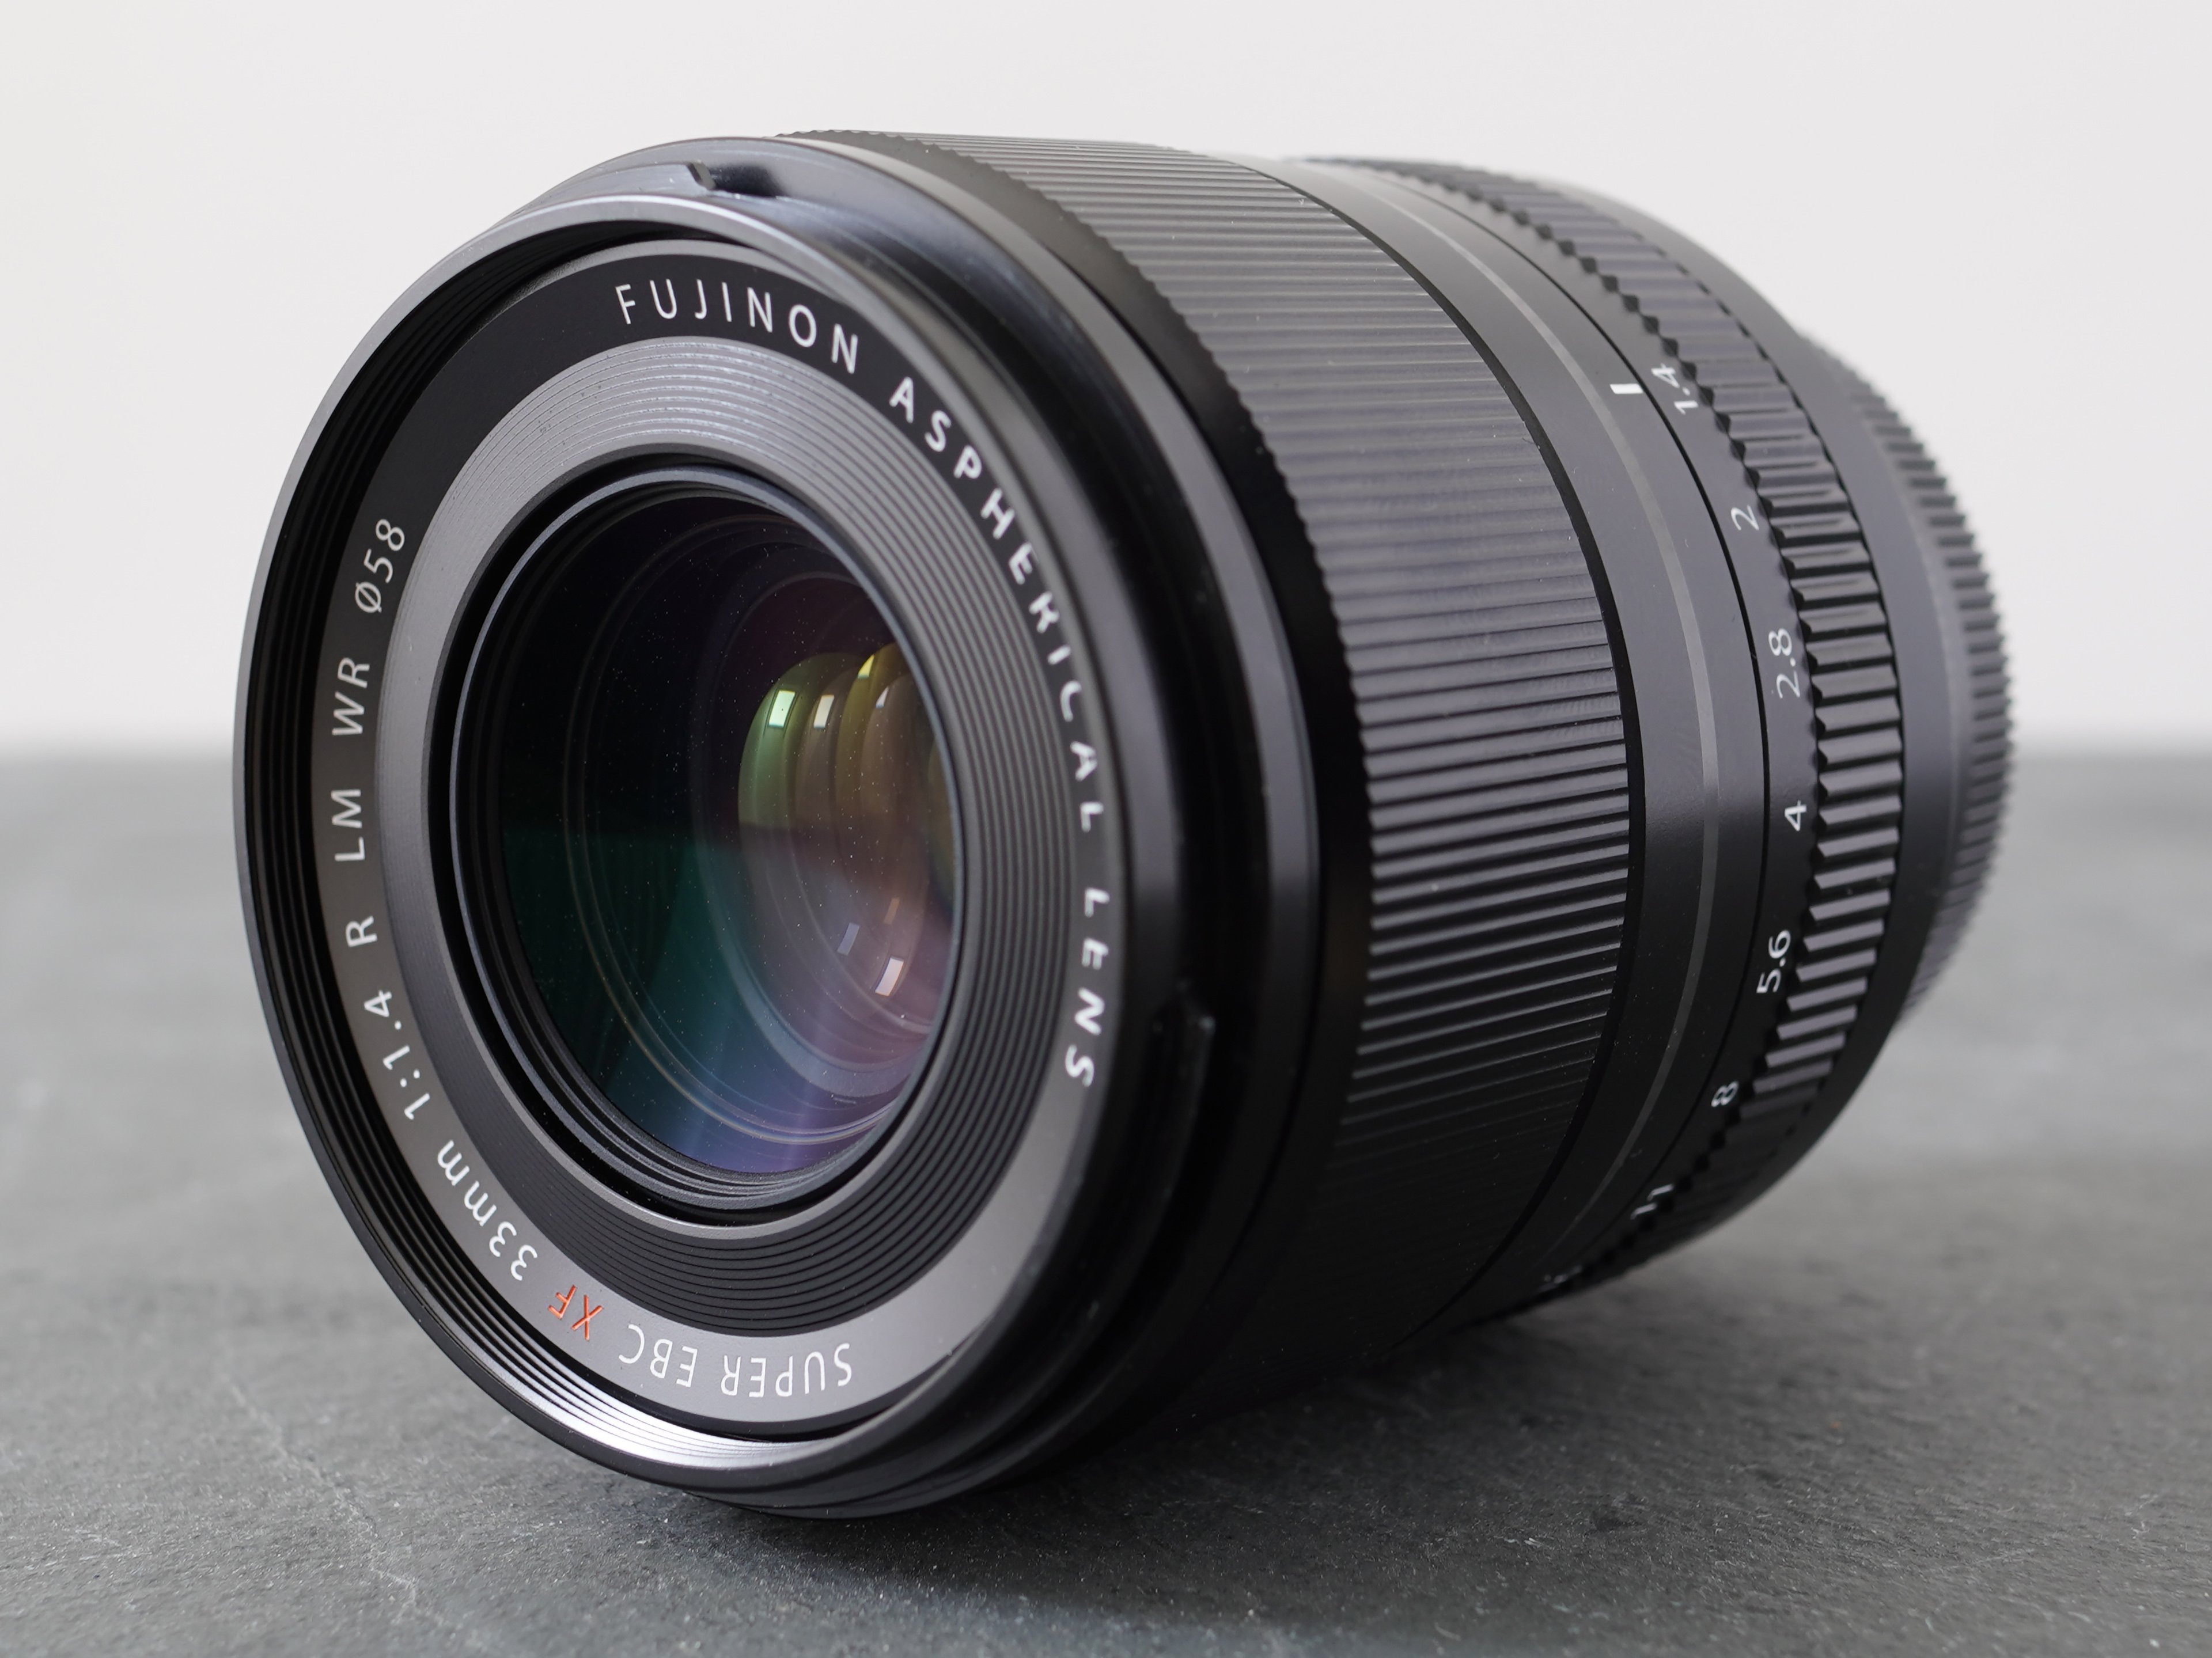 Fujifilm XF 33mm f1.4 R LM WR review | Cameralabs